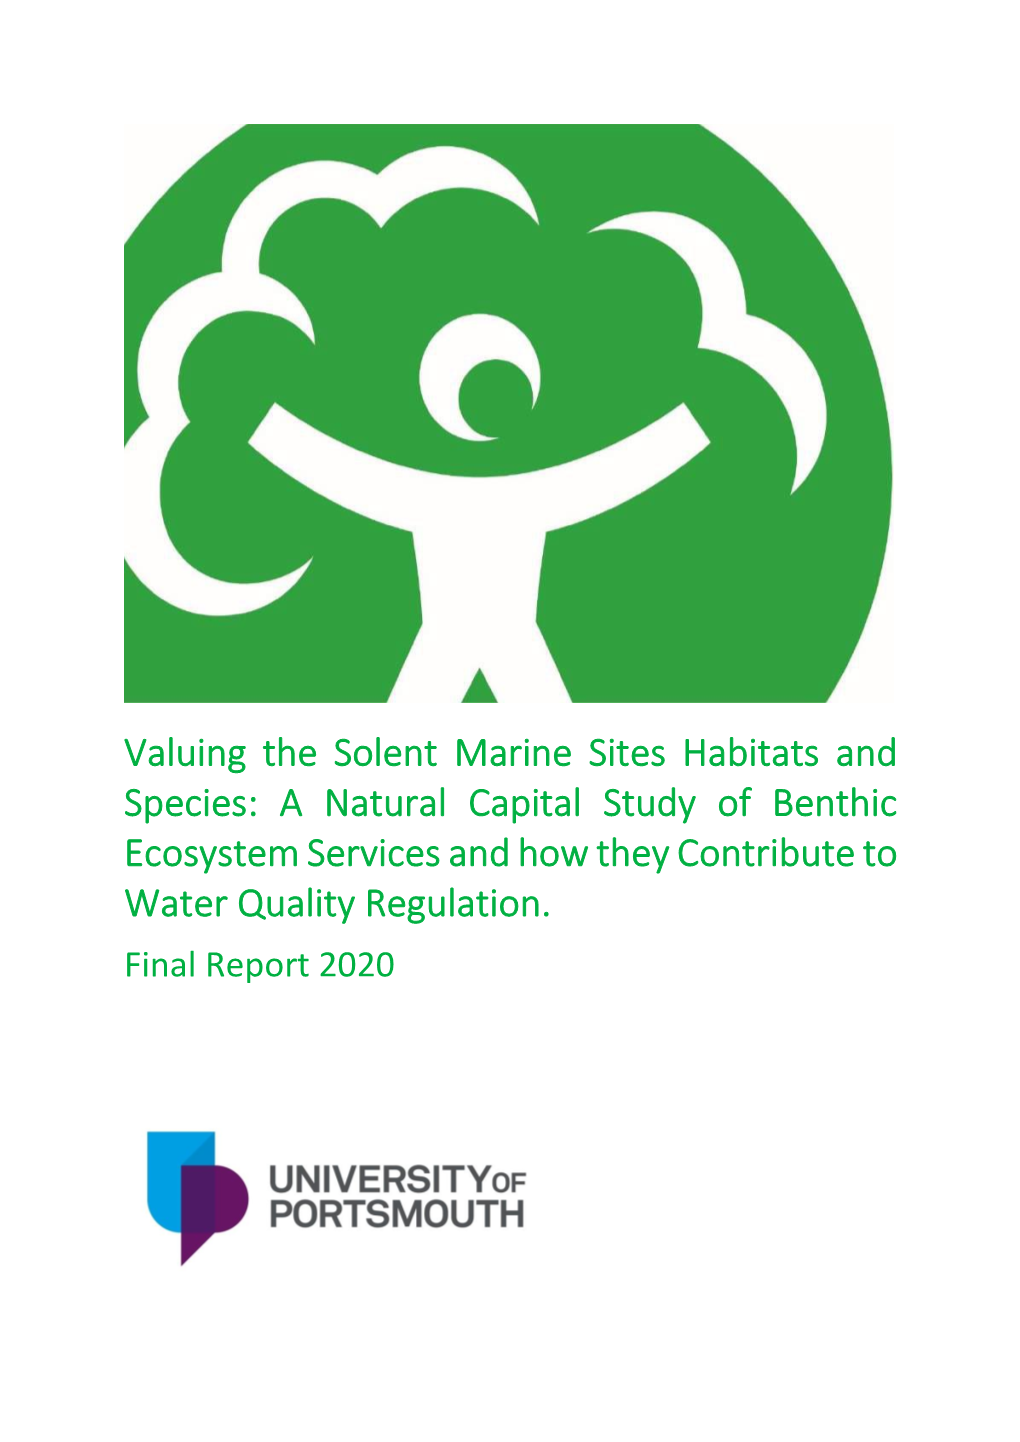 Valuing the Solent Marine Sites Habitats and Species: a Natural Capital Study of Benthic Ecosystem Services and How They Contribute to Water Quality Regulation